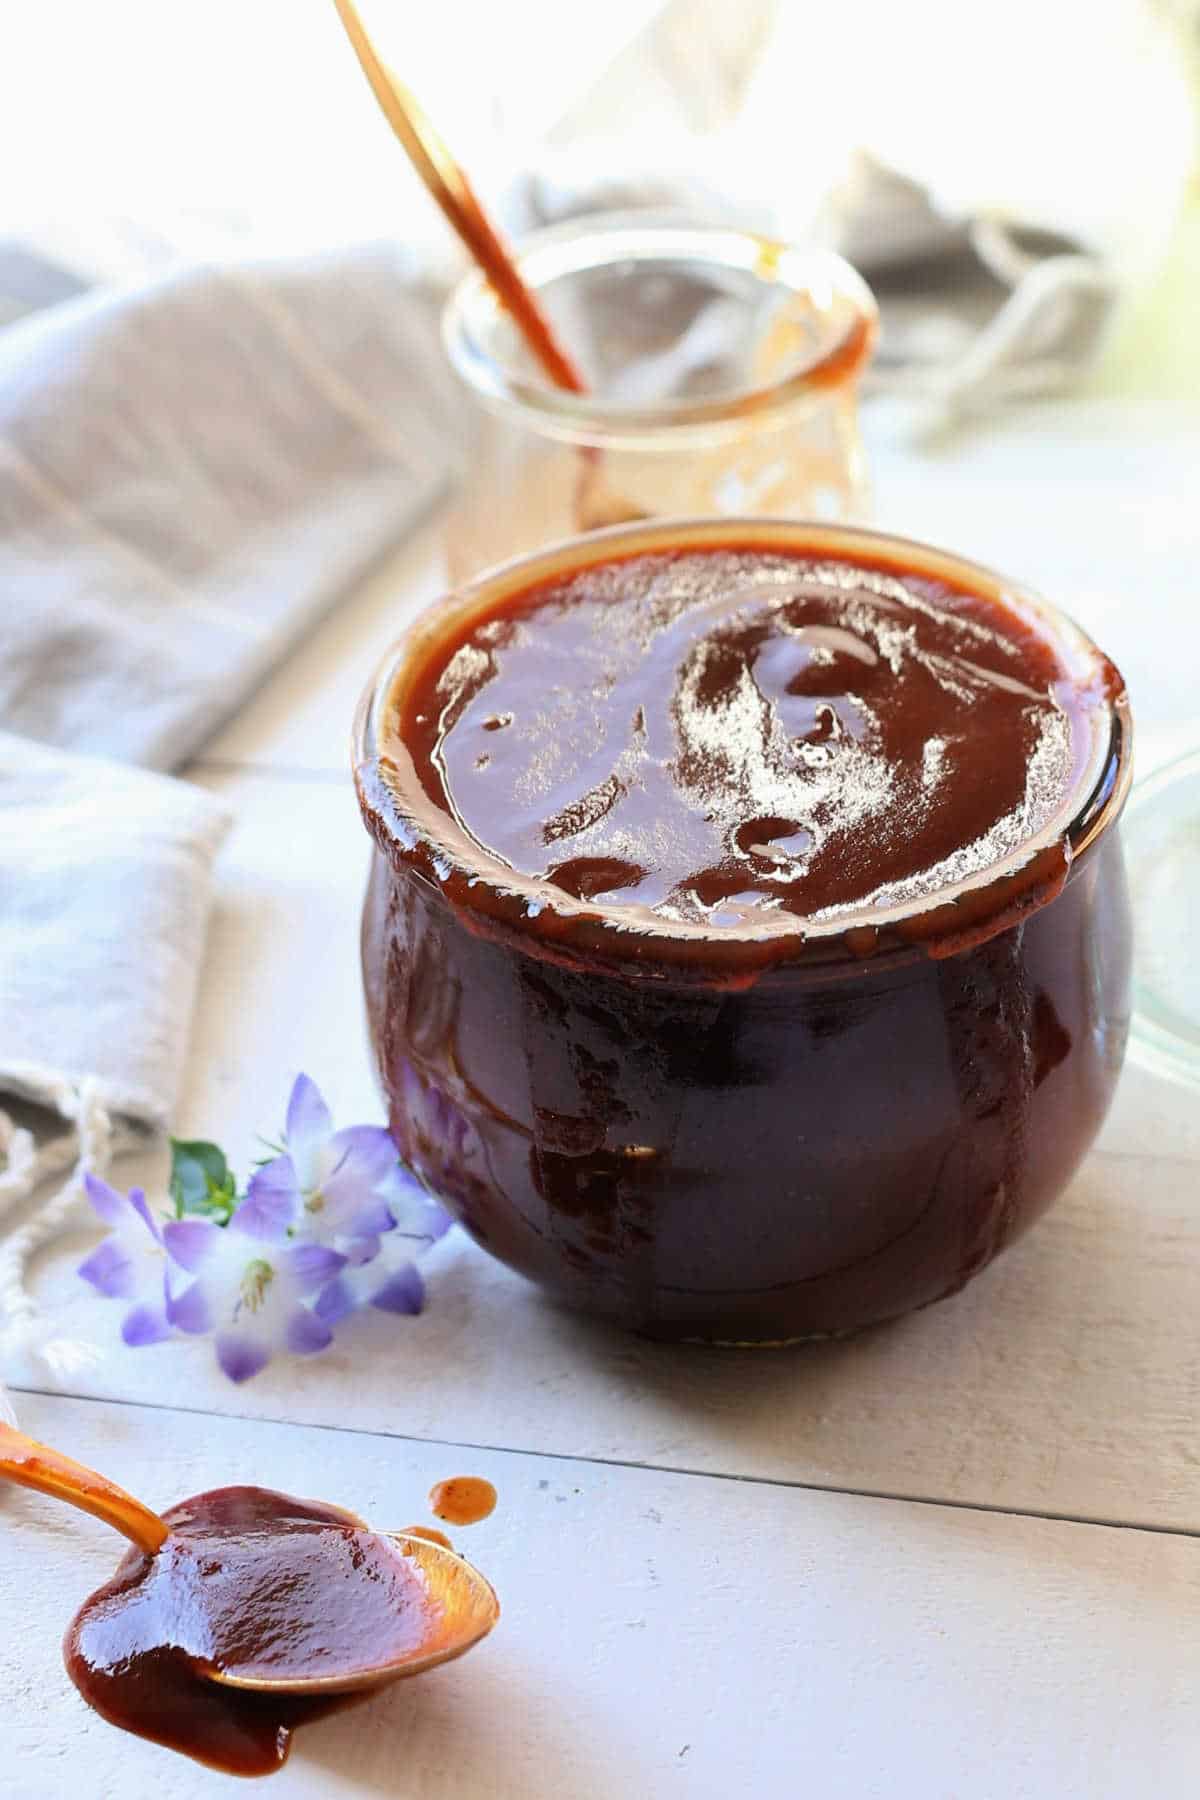 Easy BBQ sauce recipe to make at home for a marinade for meats and grilling that does not contain gluten.